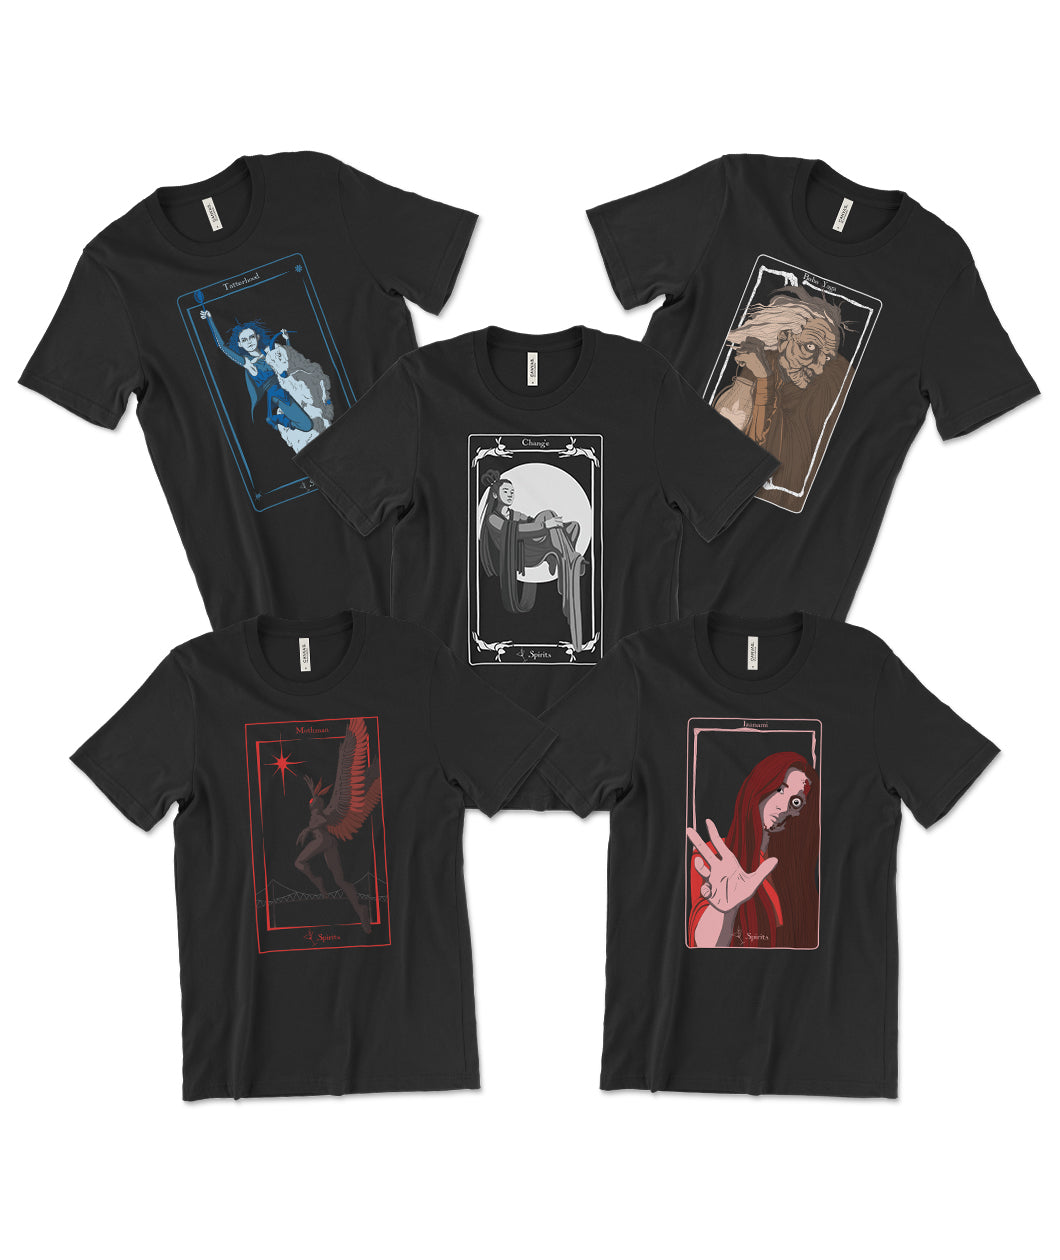 A set of five black t-shirts, each with a different rectangular tarot card design from Spirits on the front. 